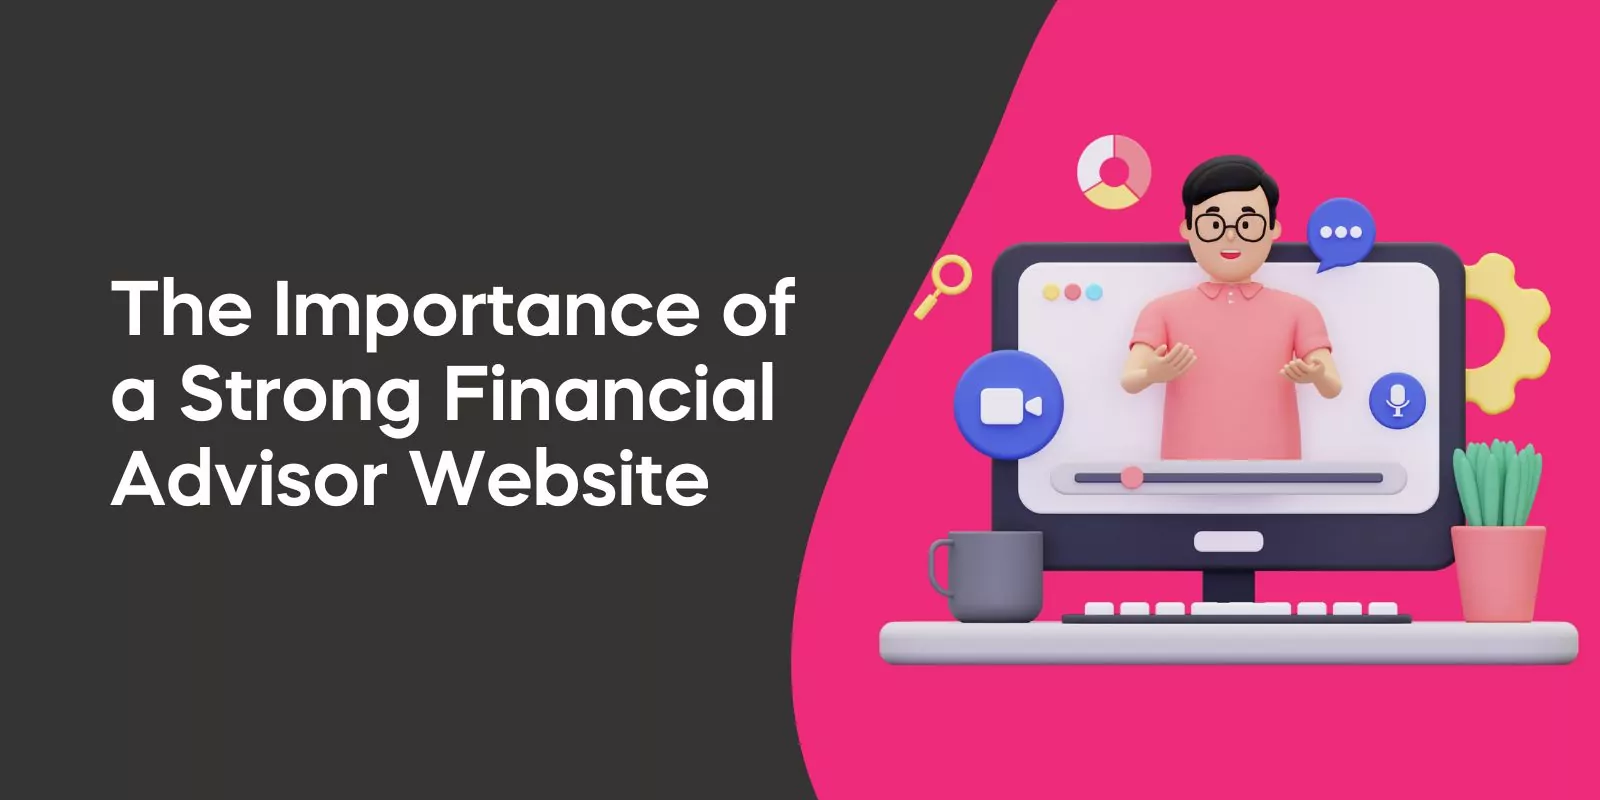 The Importance of a Strong Financial Advisor Website